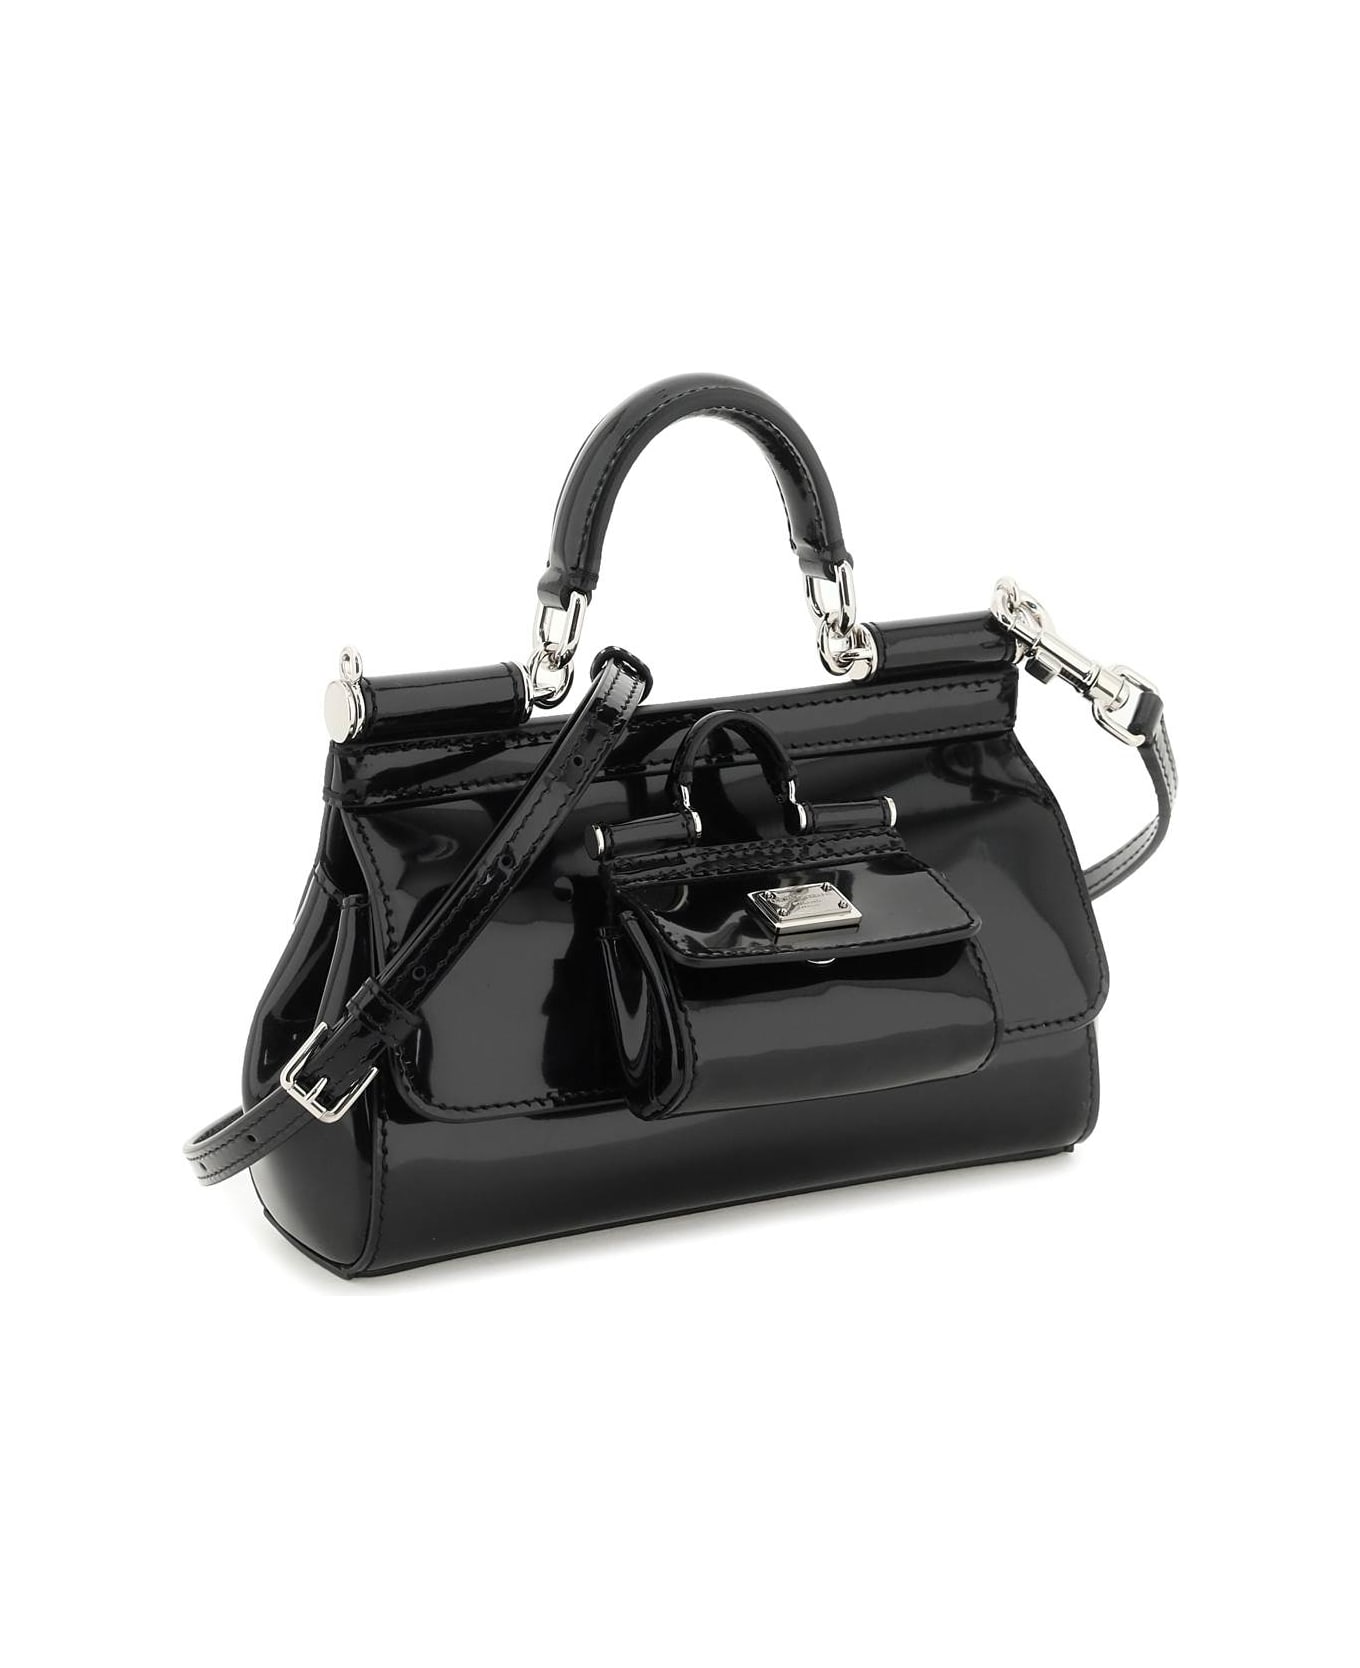 Dolce & Gabbana Patent Leather Small 'sicily' Bag With Coin Purse - Black トートバッグ